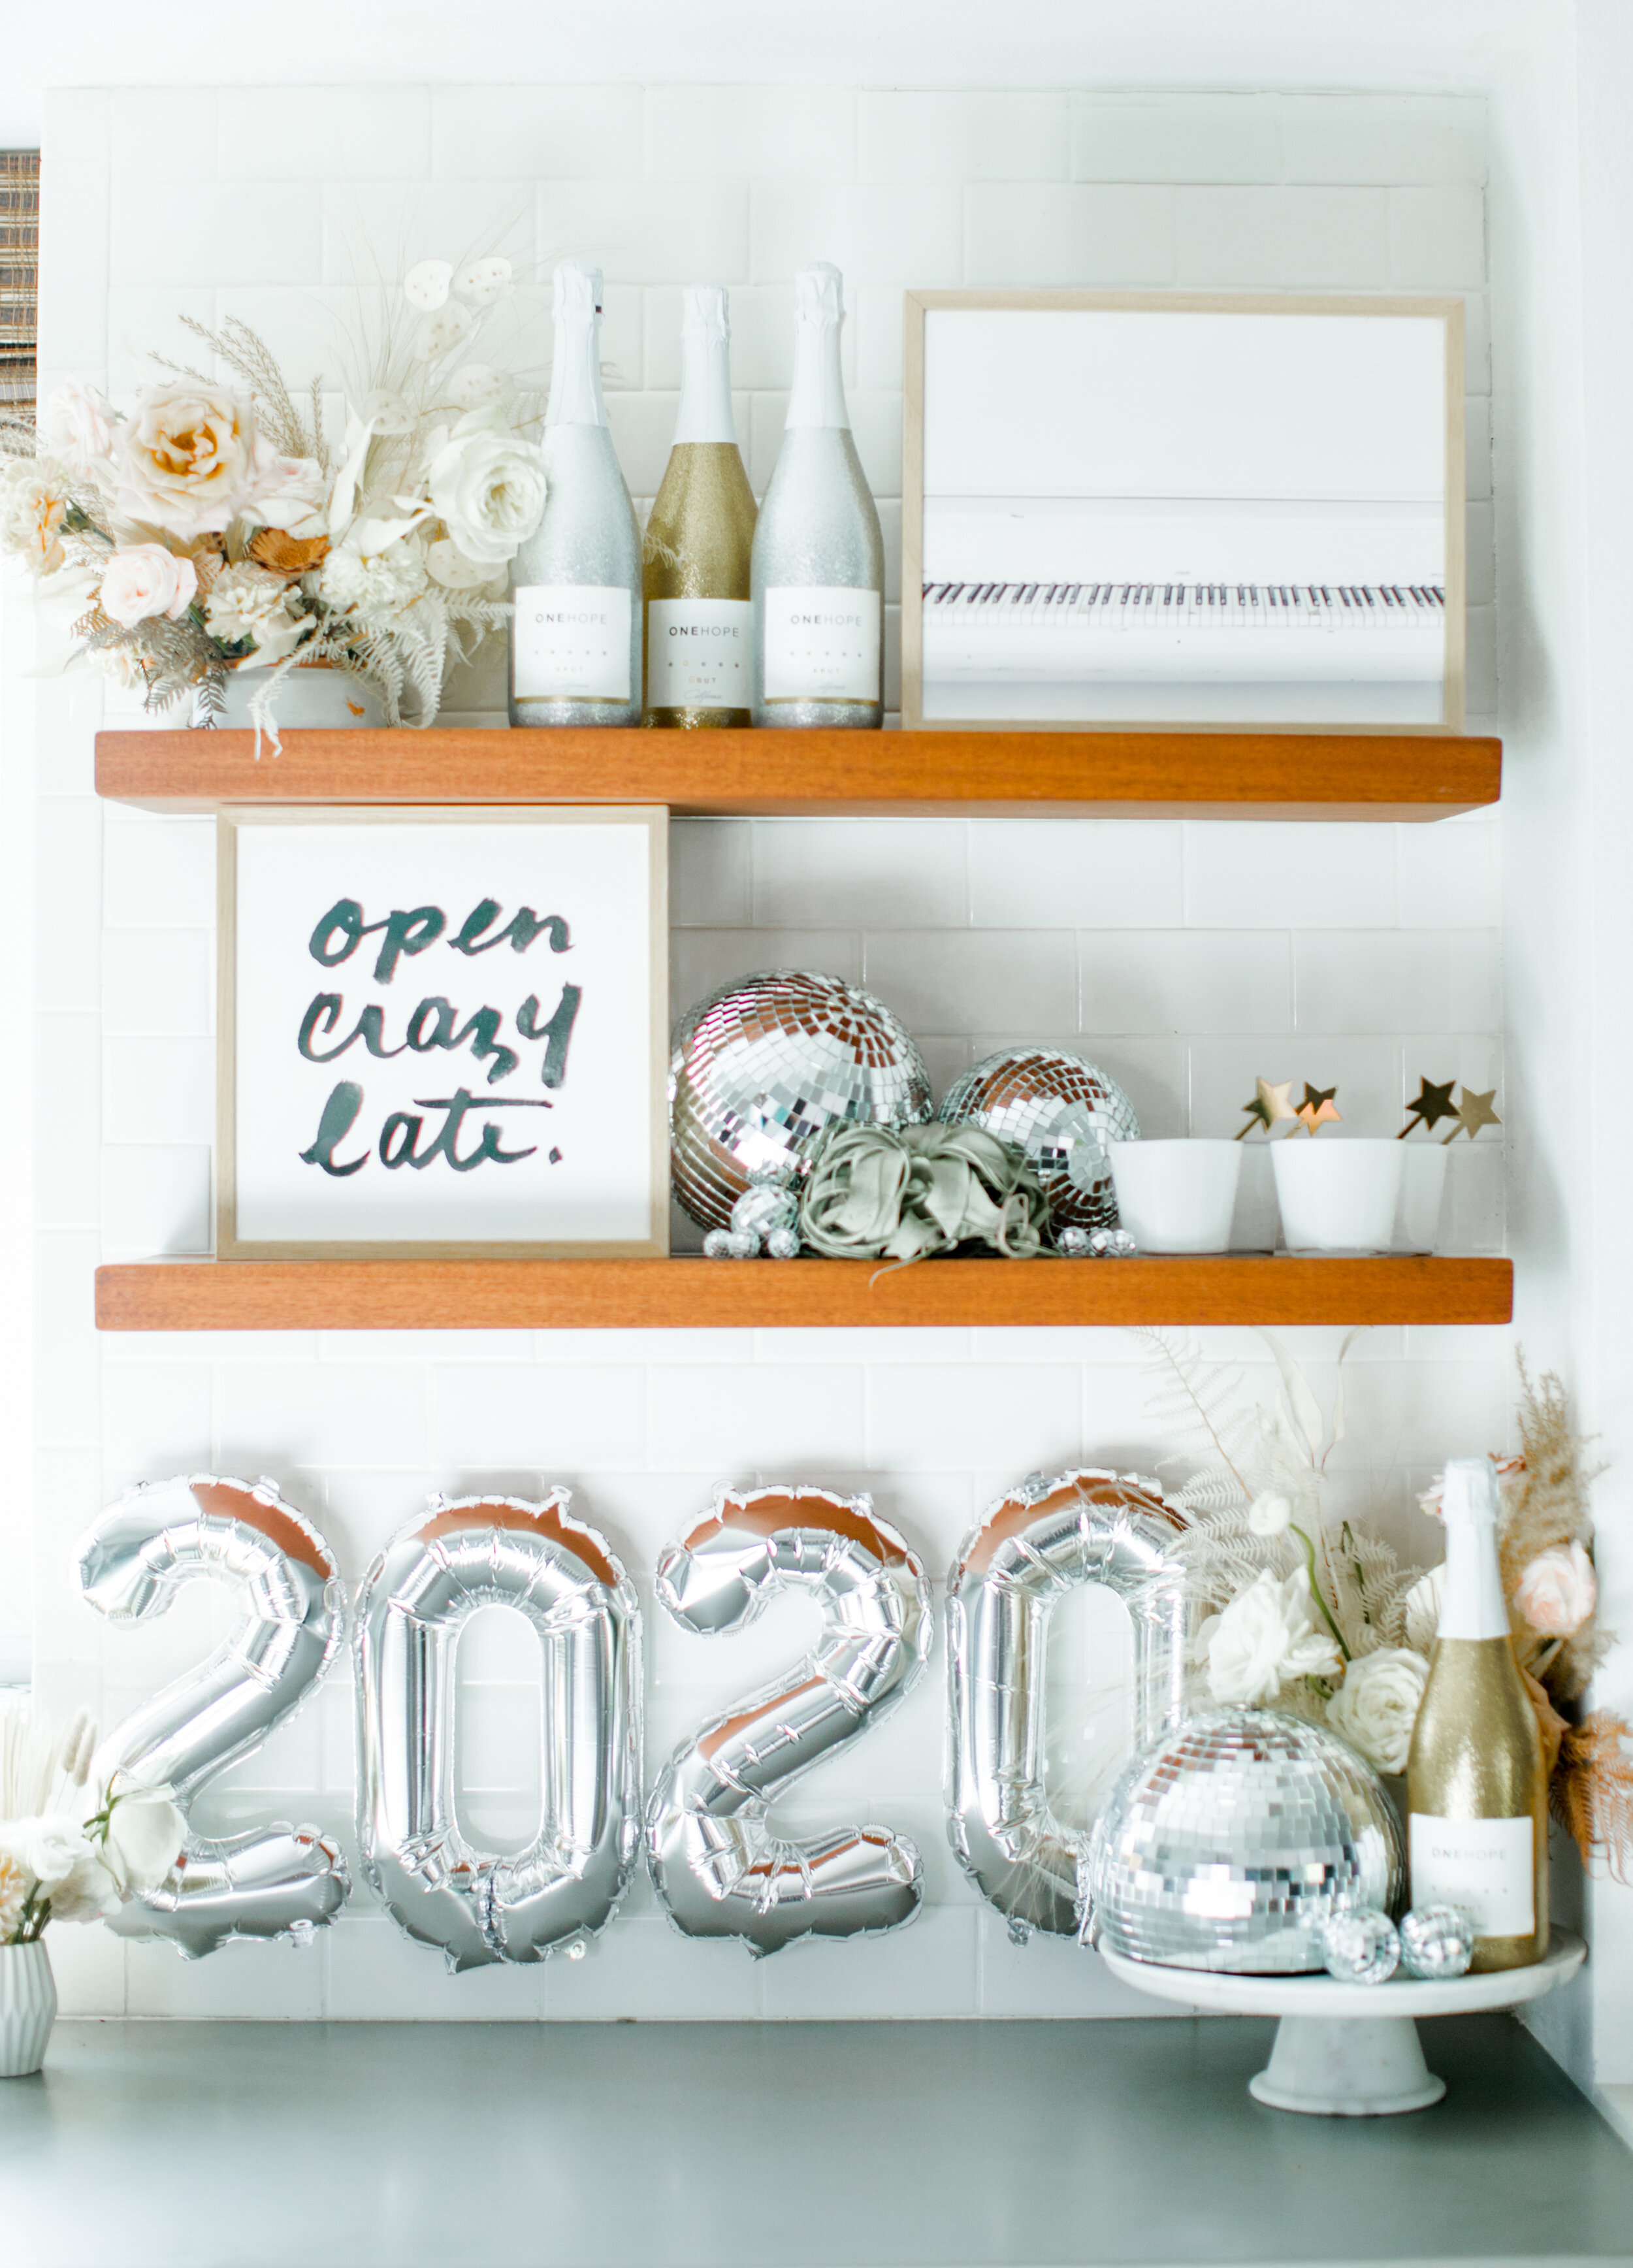 Mixed metallic NYE party inspiration - Champagne Bar - Get more New Year’s Eve decor ideas now at minteventdesign.com!